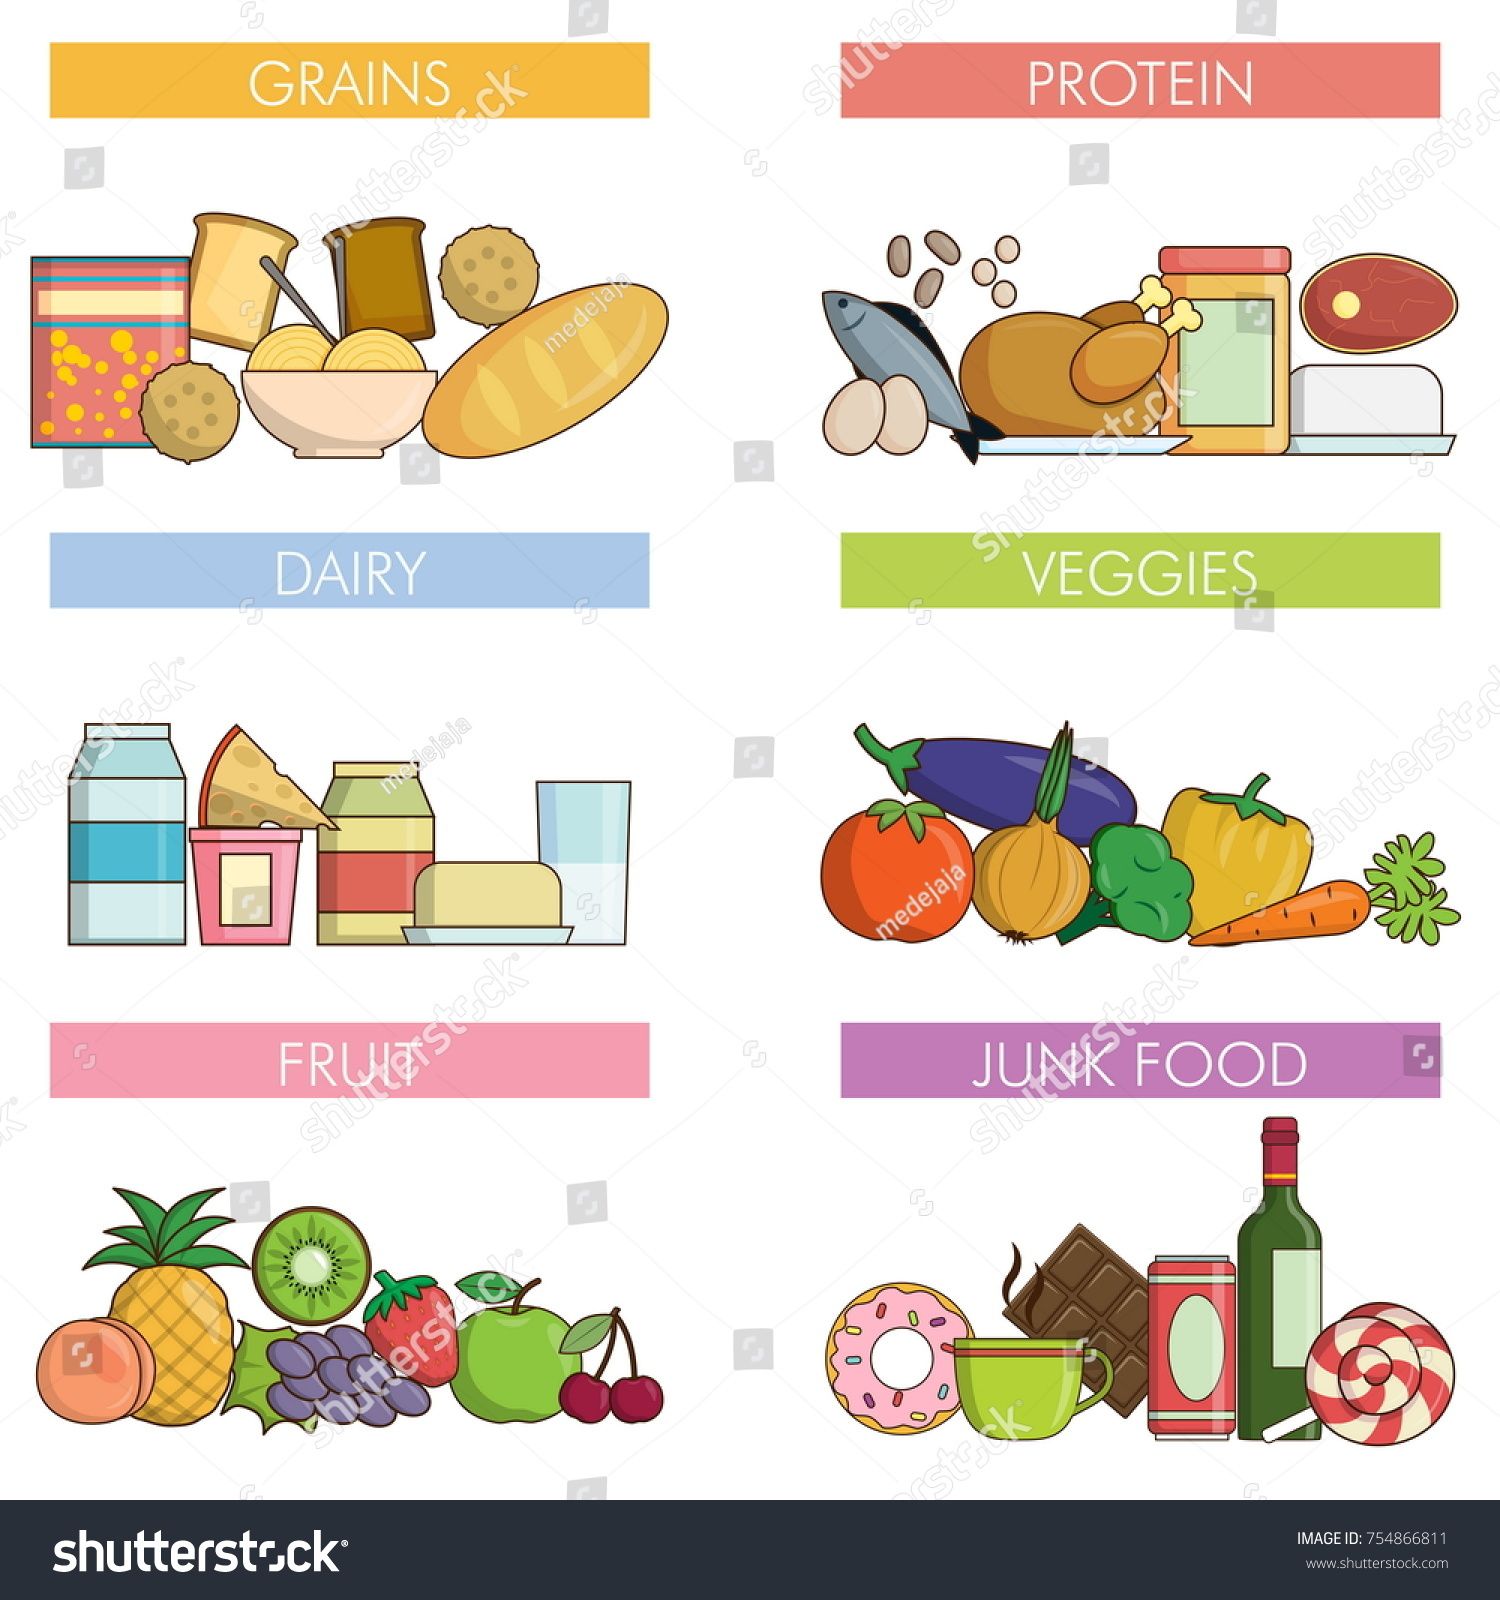 dairy clipart protein group